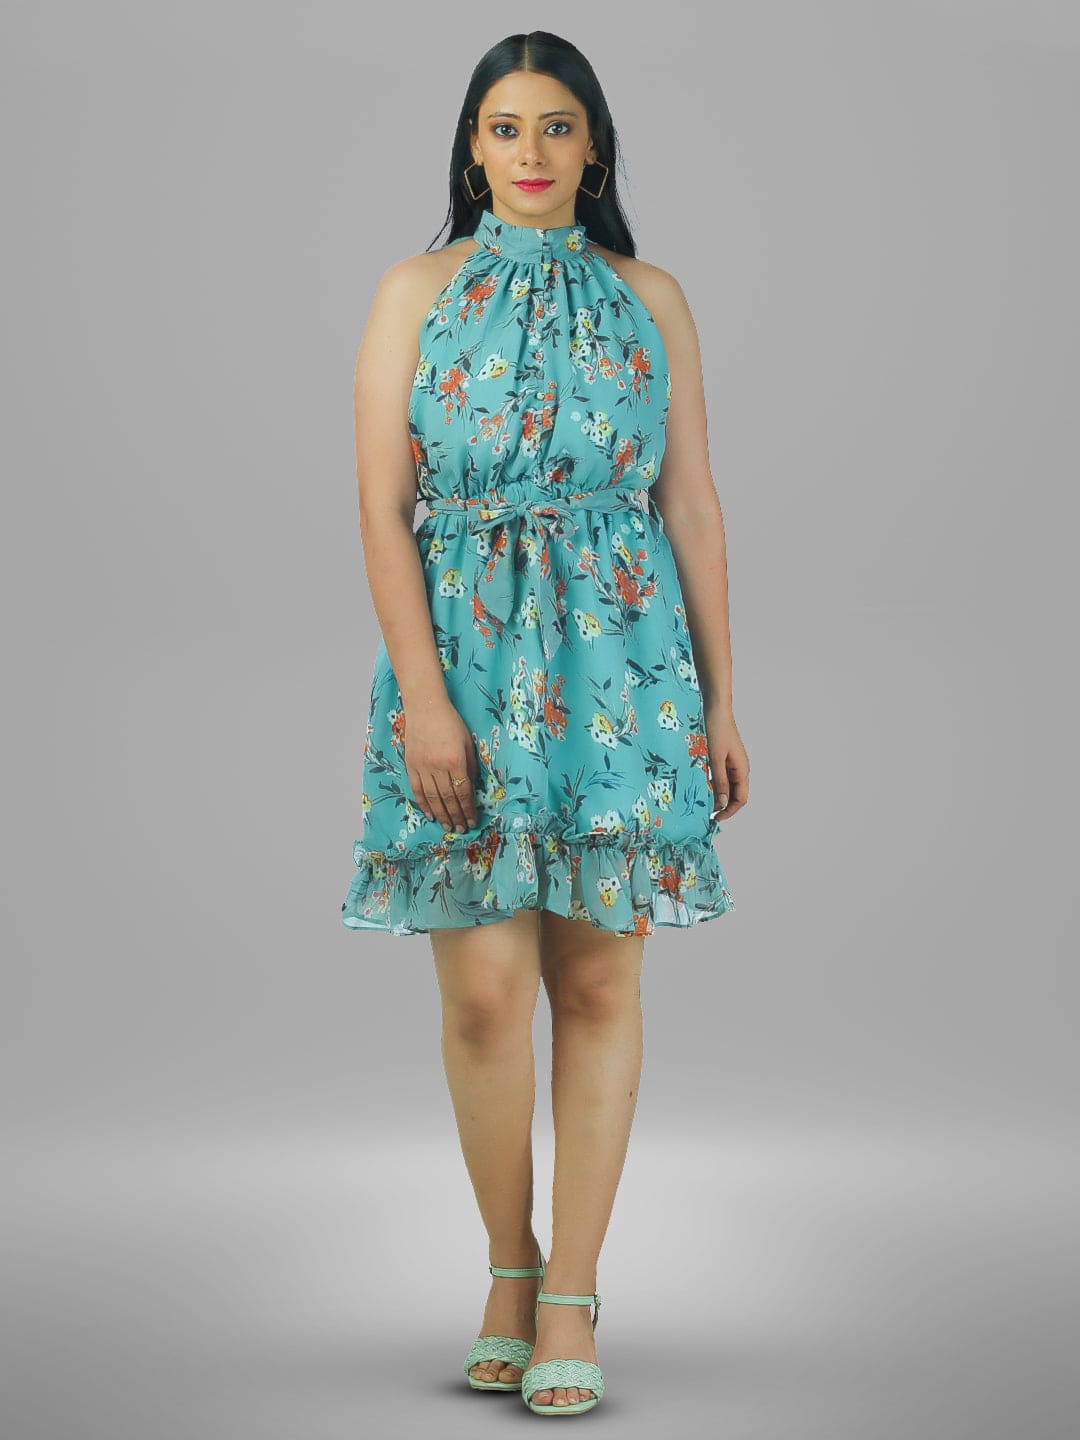 Women Floral Print Fit and Flare Dress.